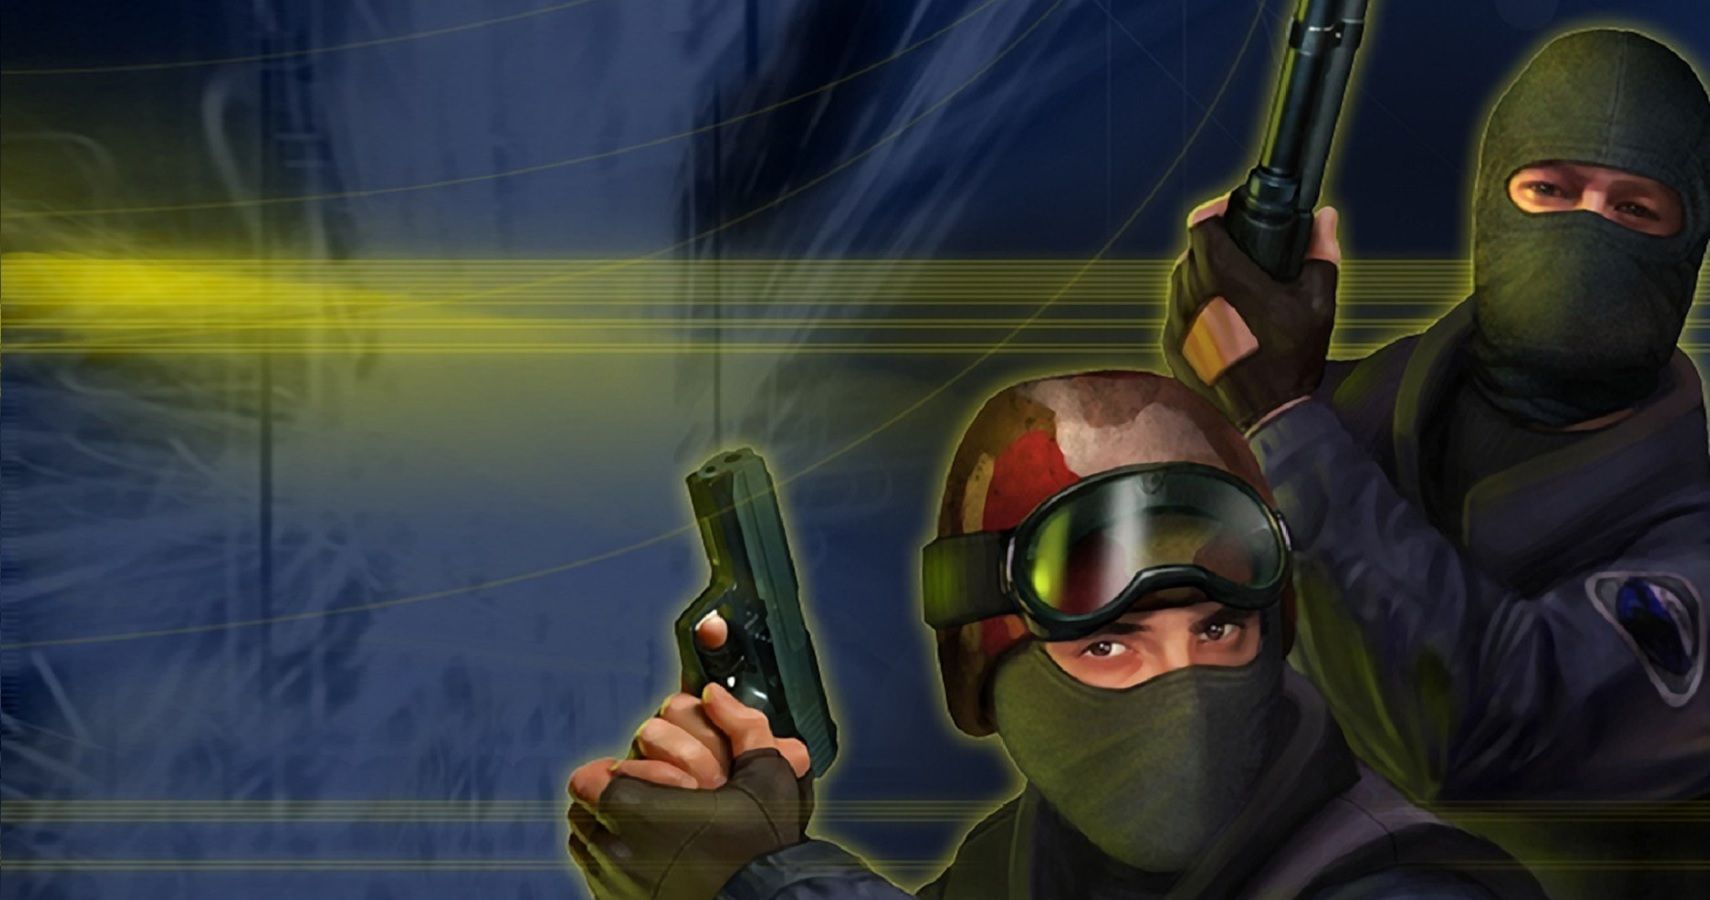 download games counter strike for free